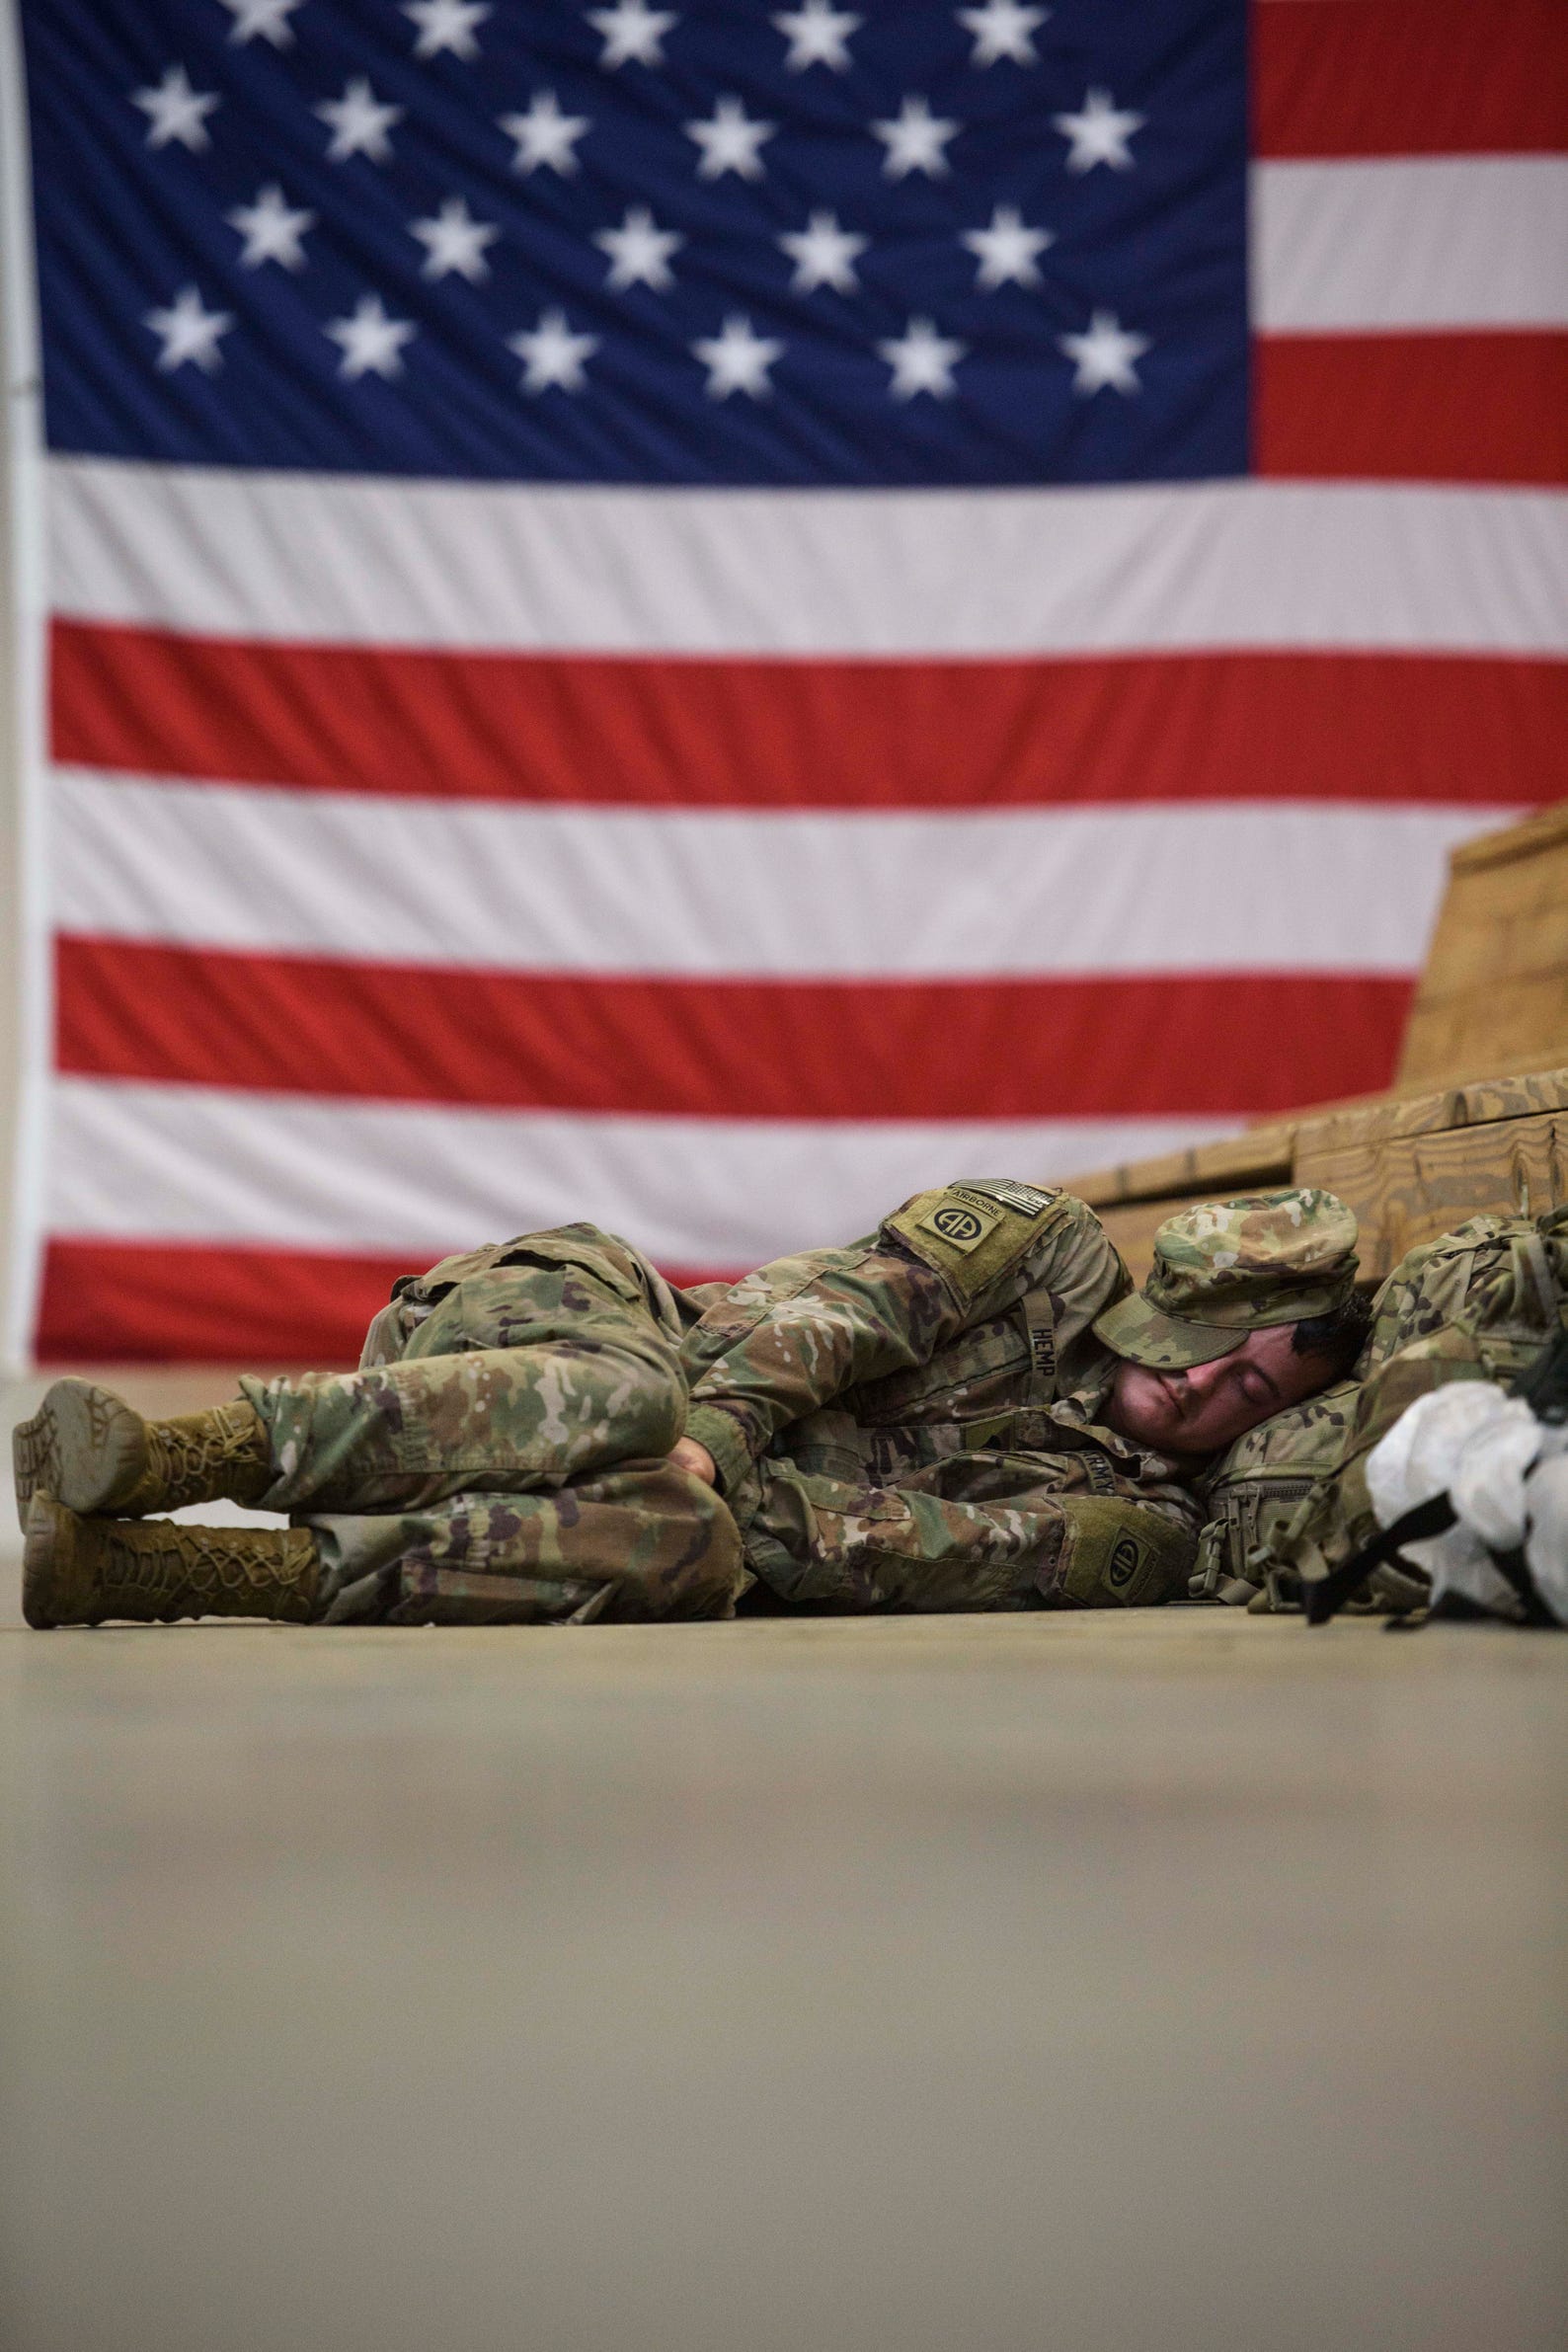 A soldier with the 82nd Airborne Division rests after having met with his unit at 4 am at Fort Bragg.